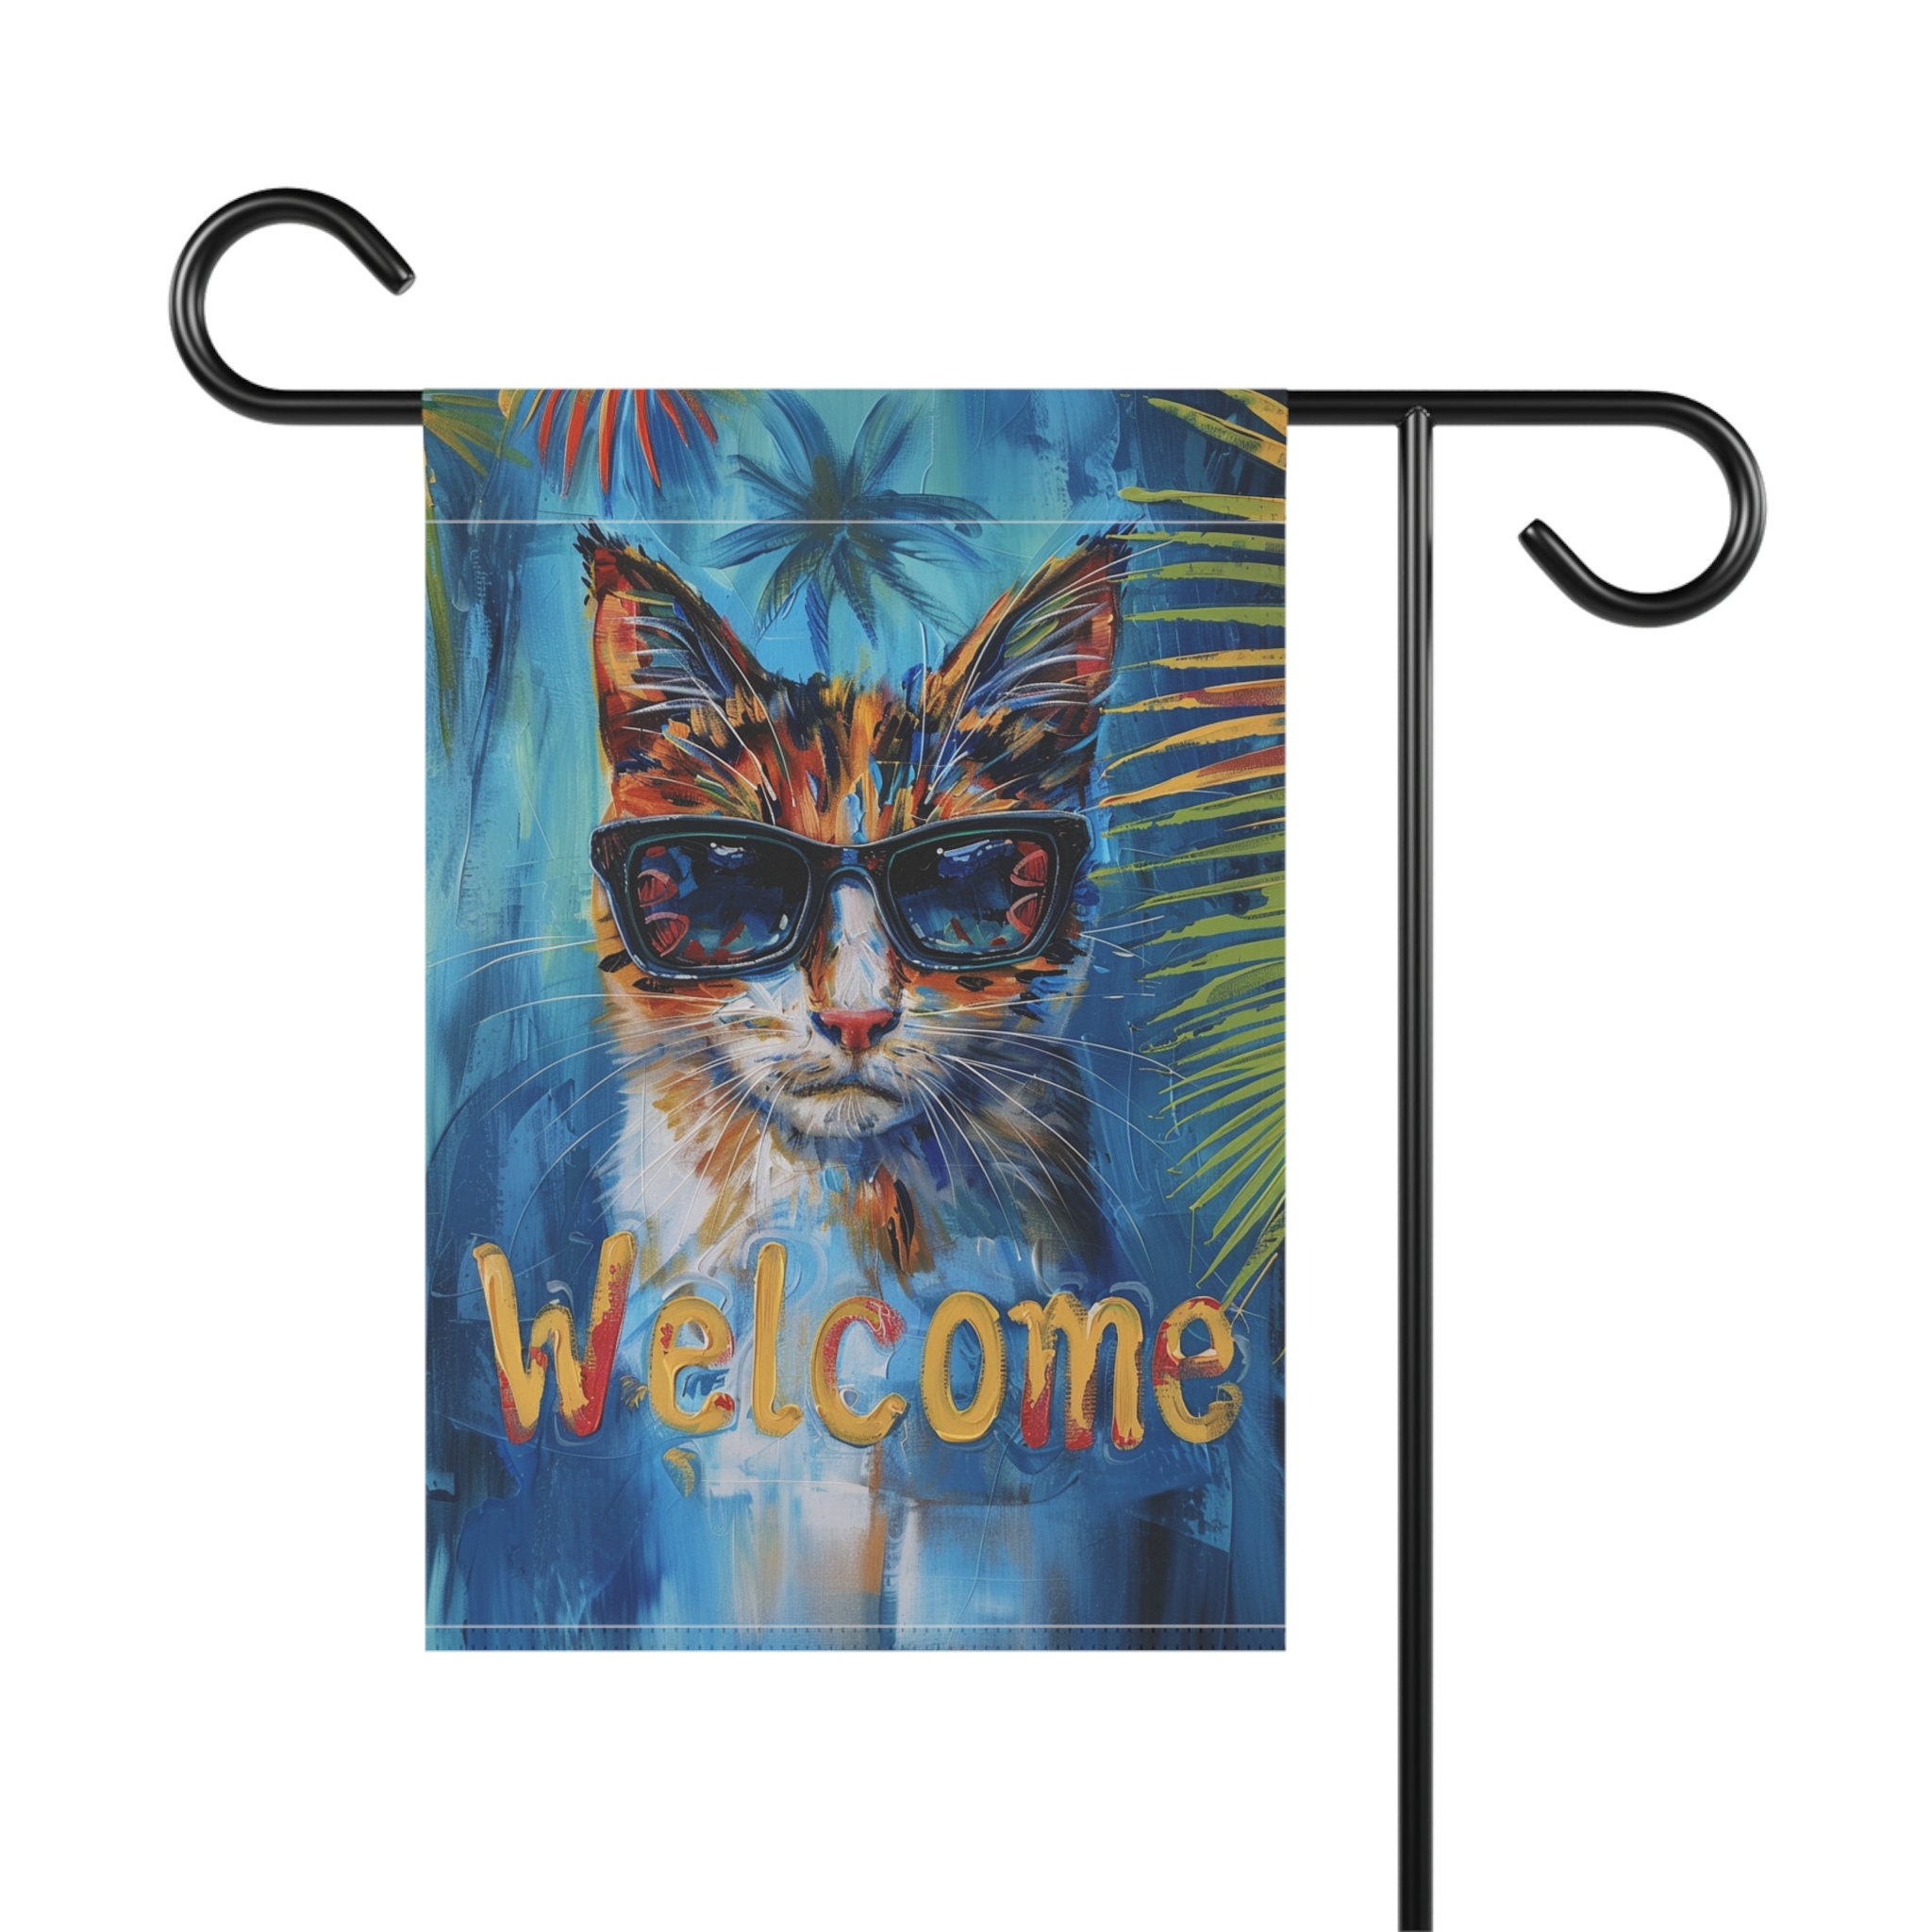 Calico Cat Garden Flag, Summer Themed Decor, Calico Cat Gift, Outdoor Decoration, Cat Lover, Home Decor, Welcome Sign, Yard Art